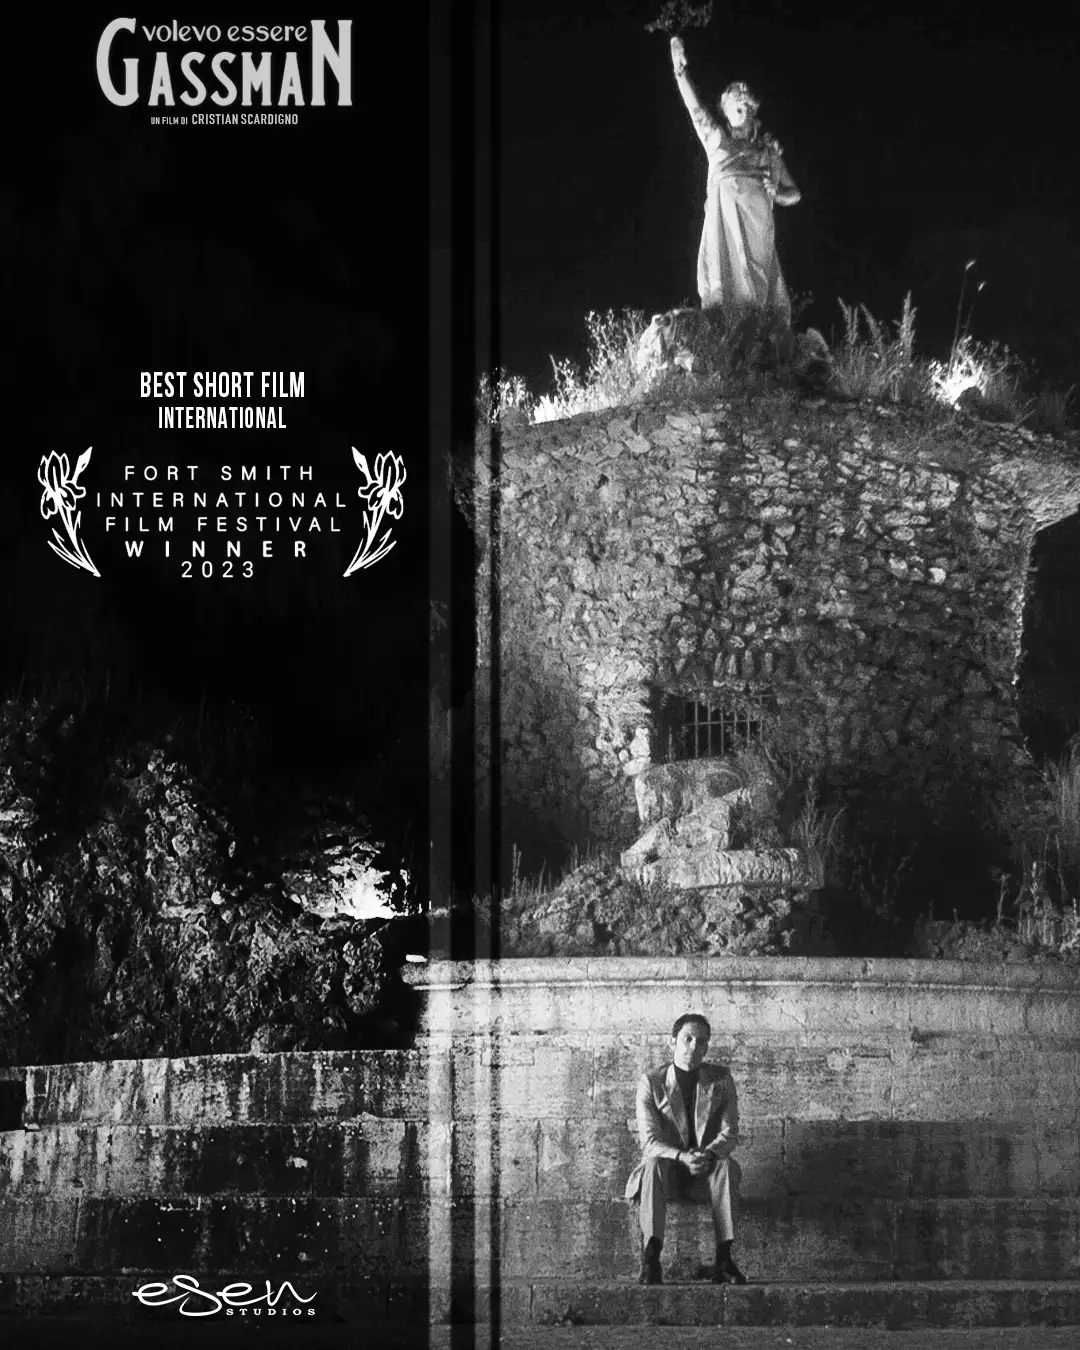 "I wanted to be Vittorio Gassman" Best Short Film at Fort Smith